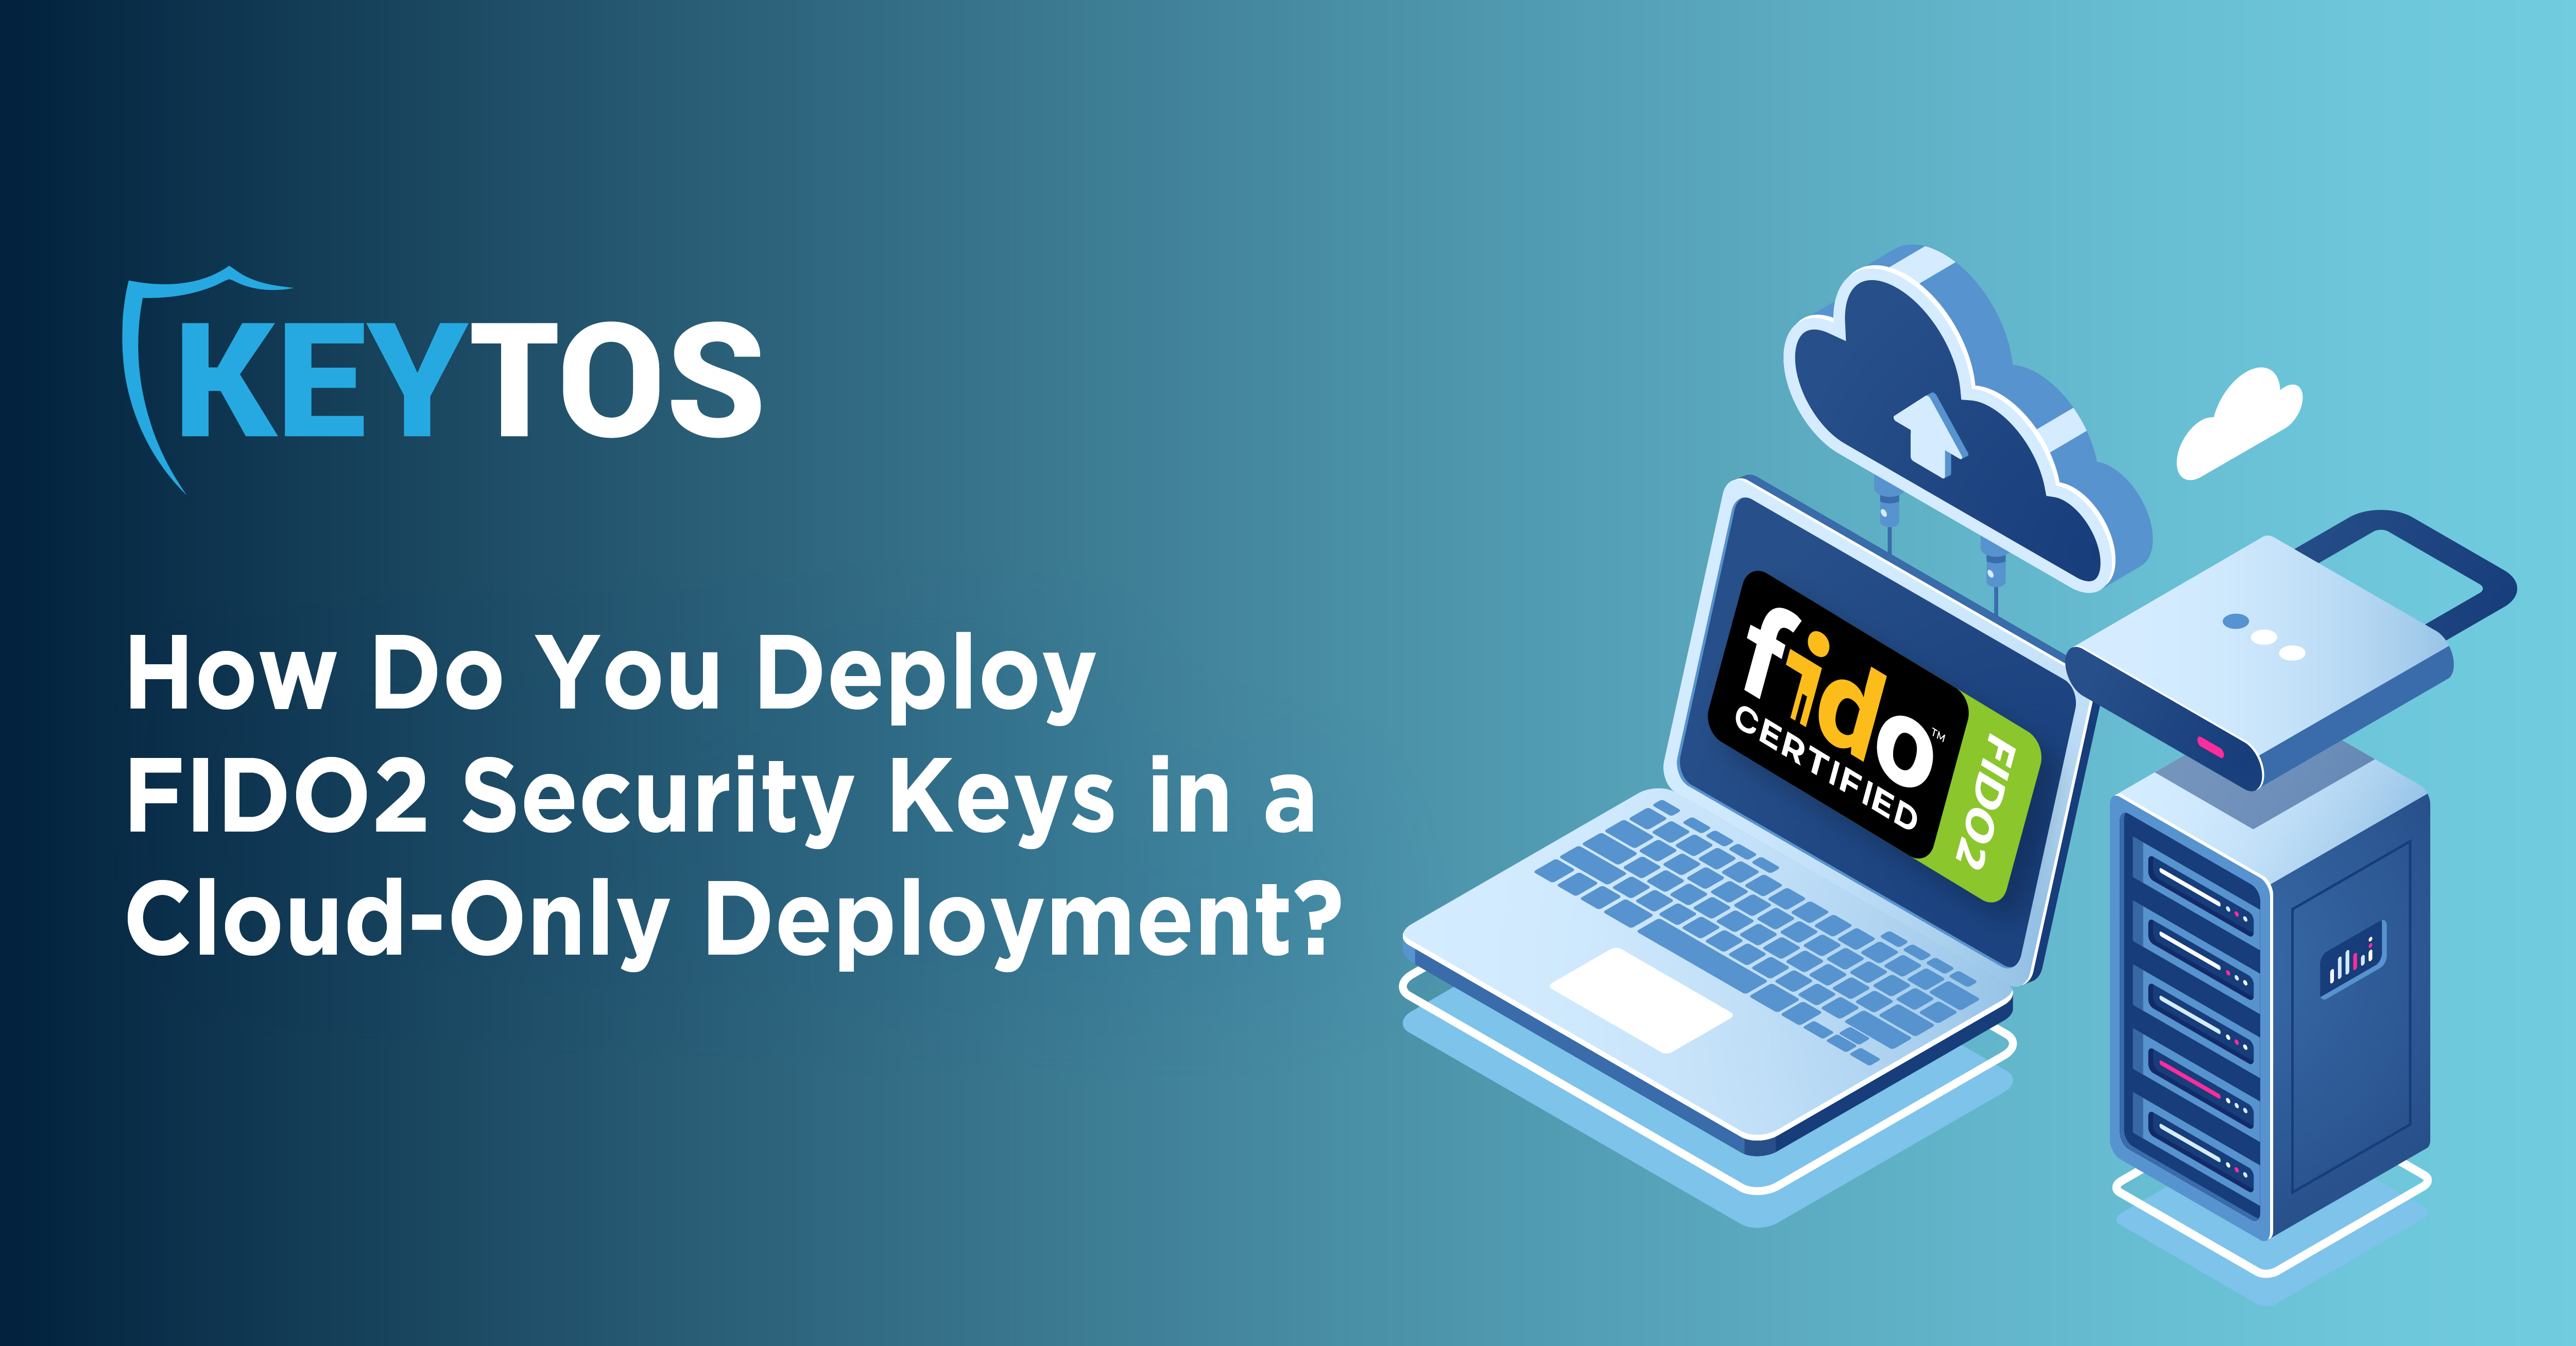 How to Deploy FIDO2 Security Keys in a Cloud-Only Deployment